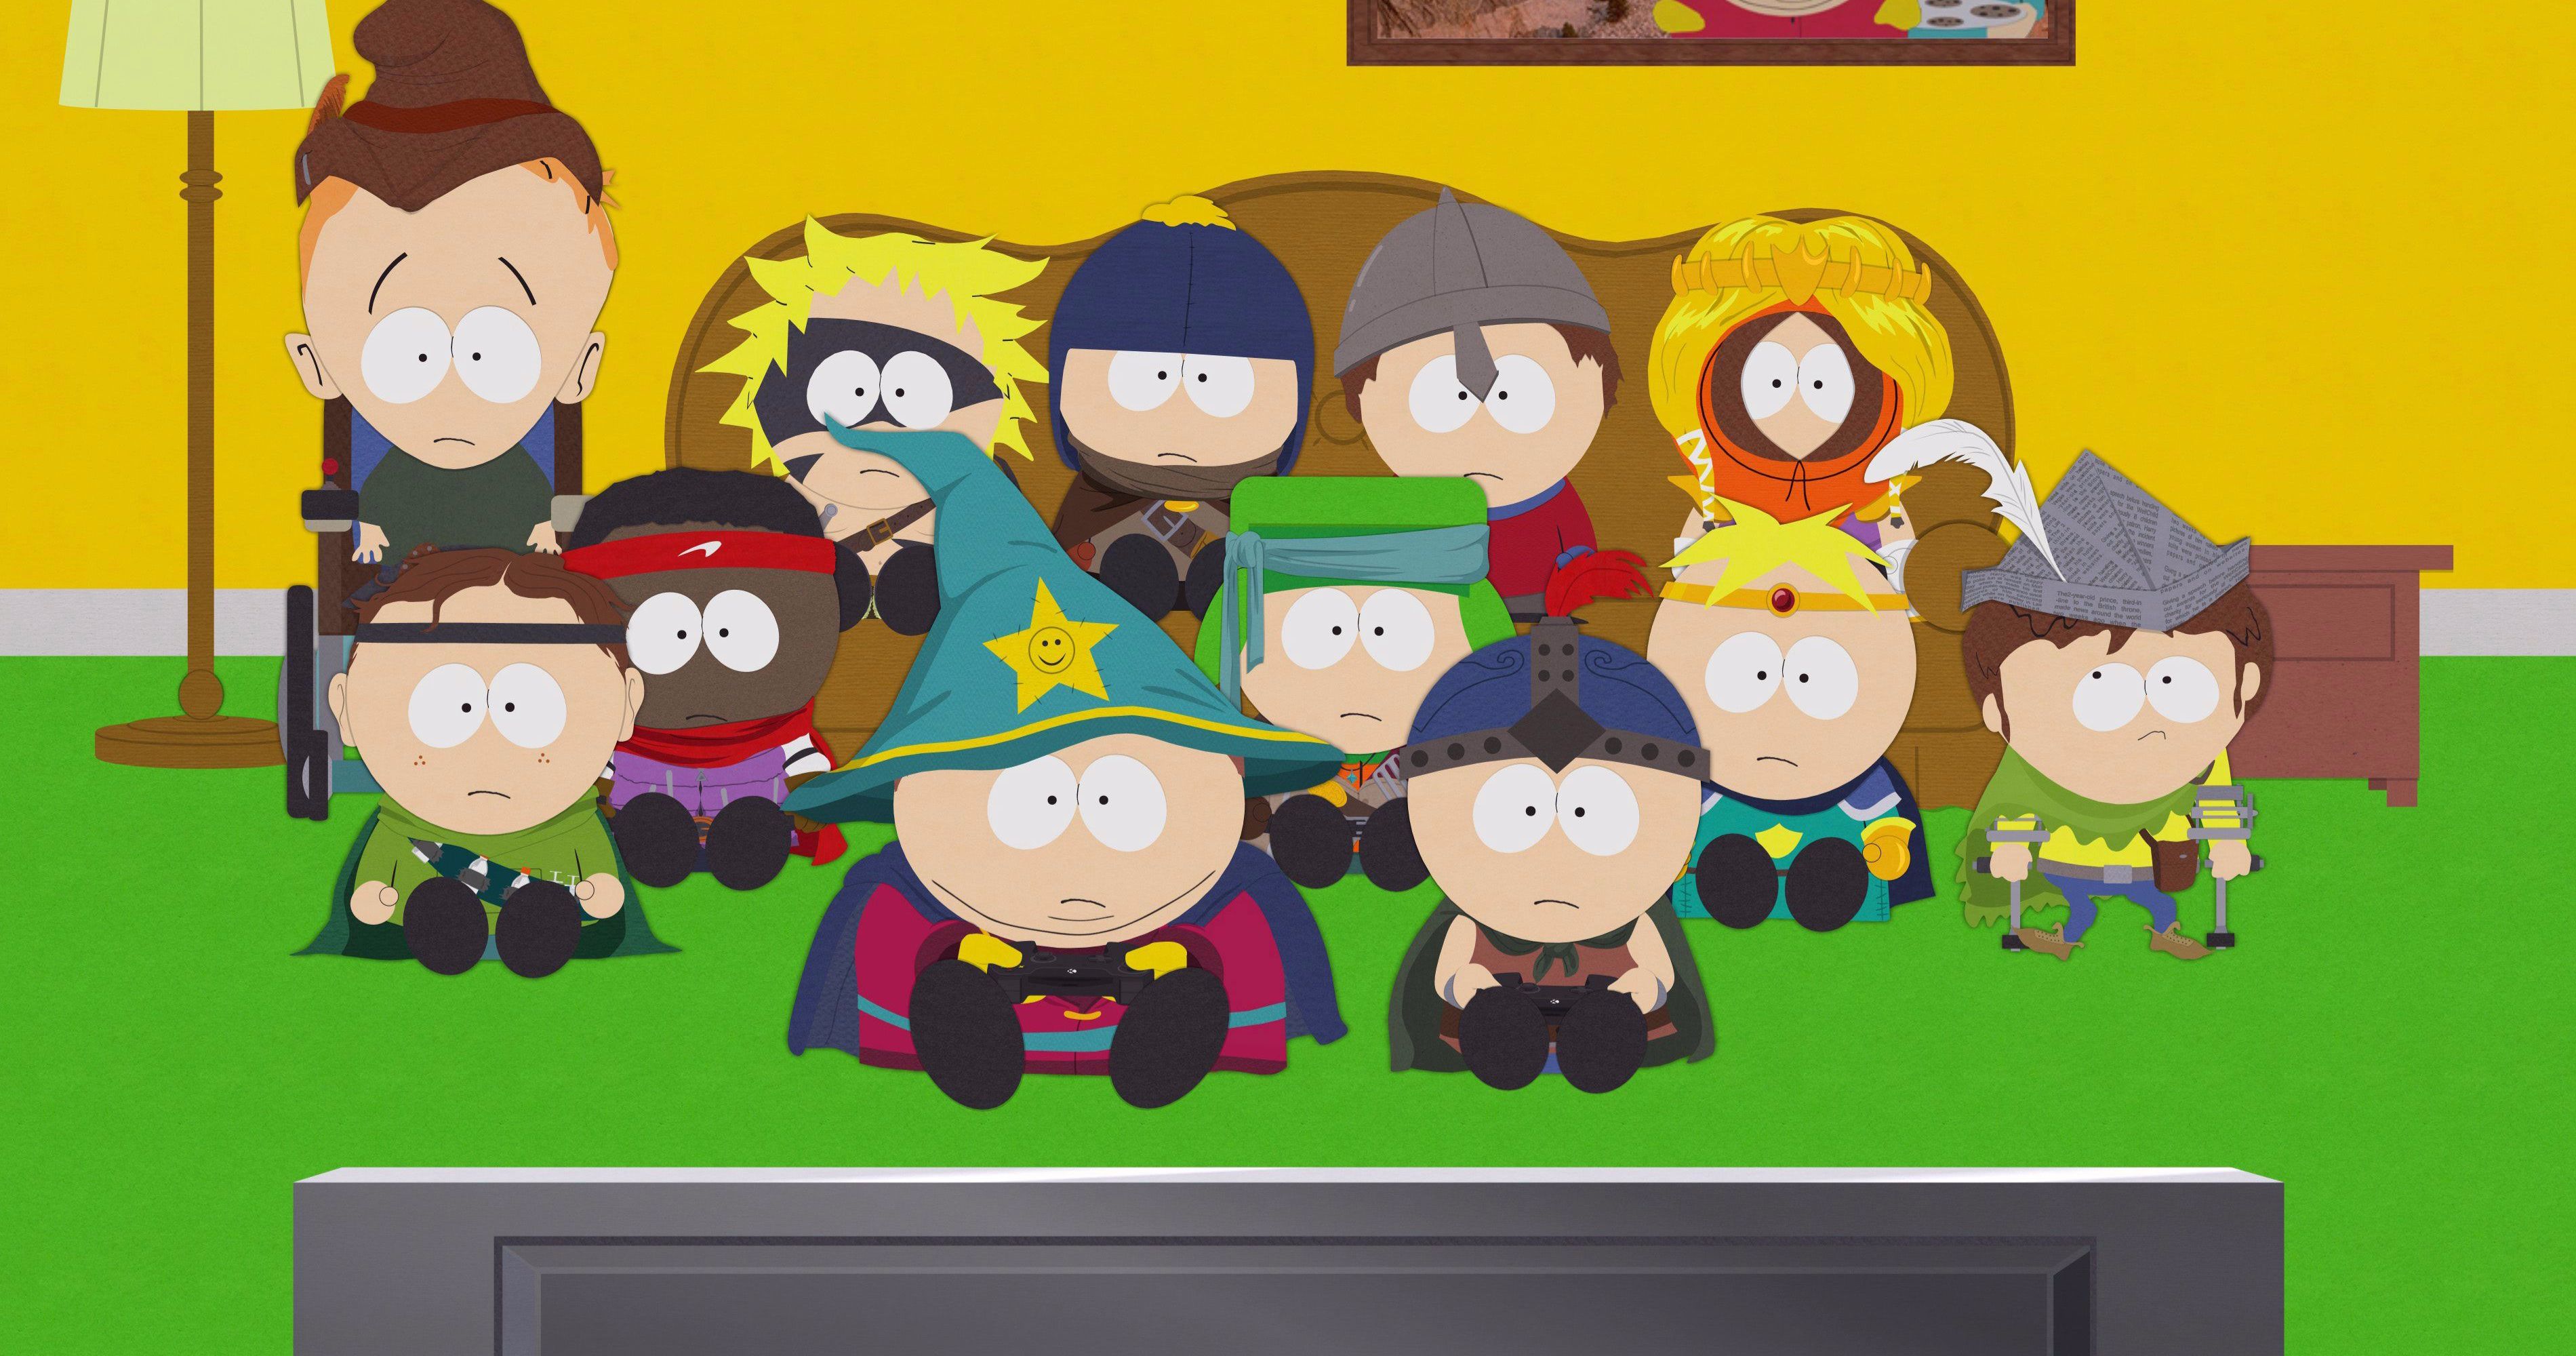 5 South Park Episodes Dropped from HBO Max Because of Prophet Muhammad References